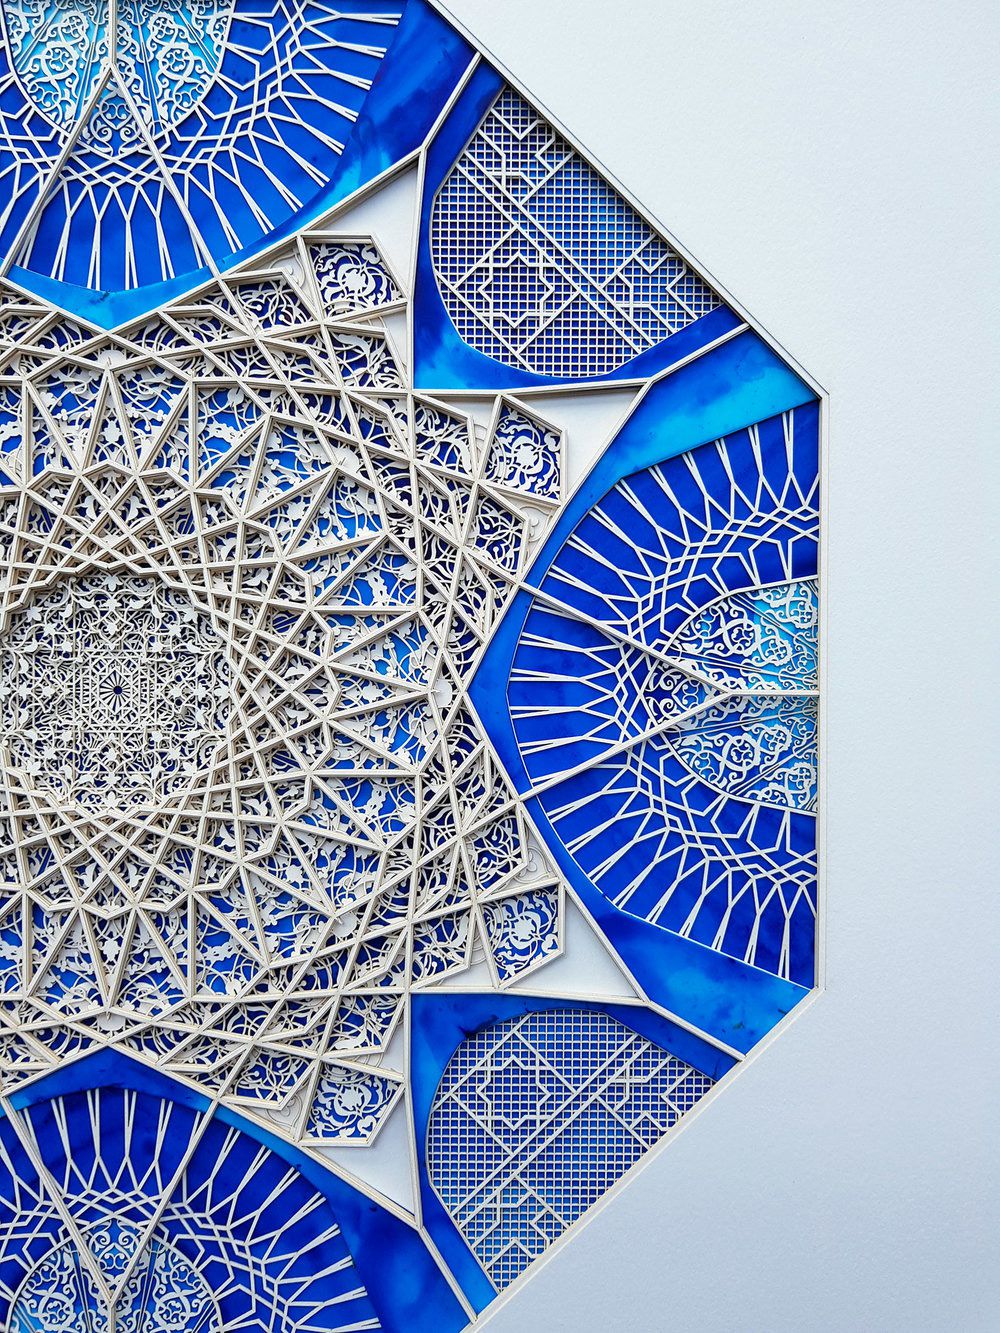 Intricate And Colorful Arabesque Made Of Laser Cut Paper Julia Ibbini 12